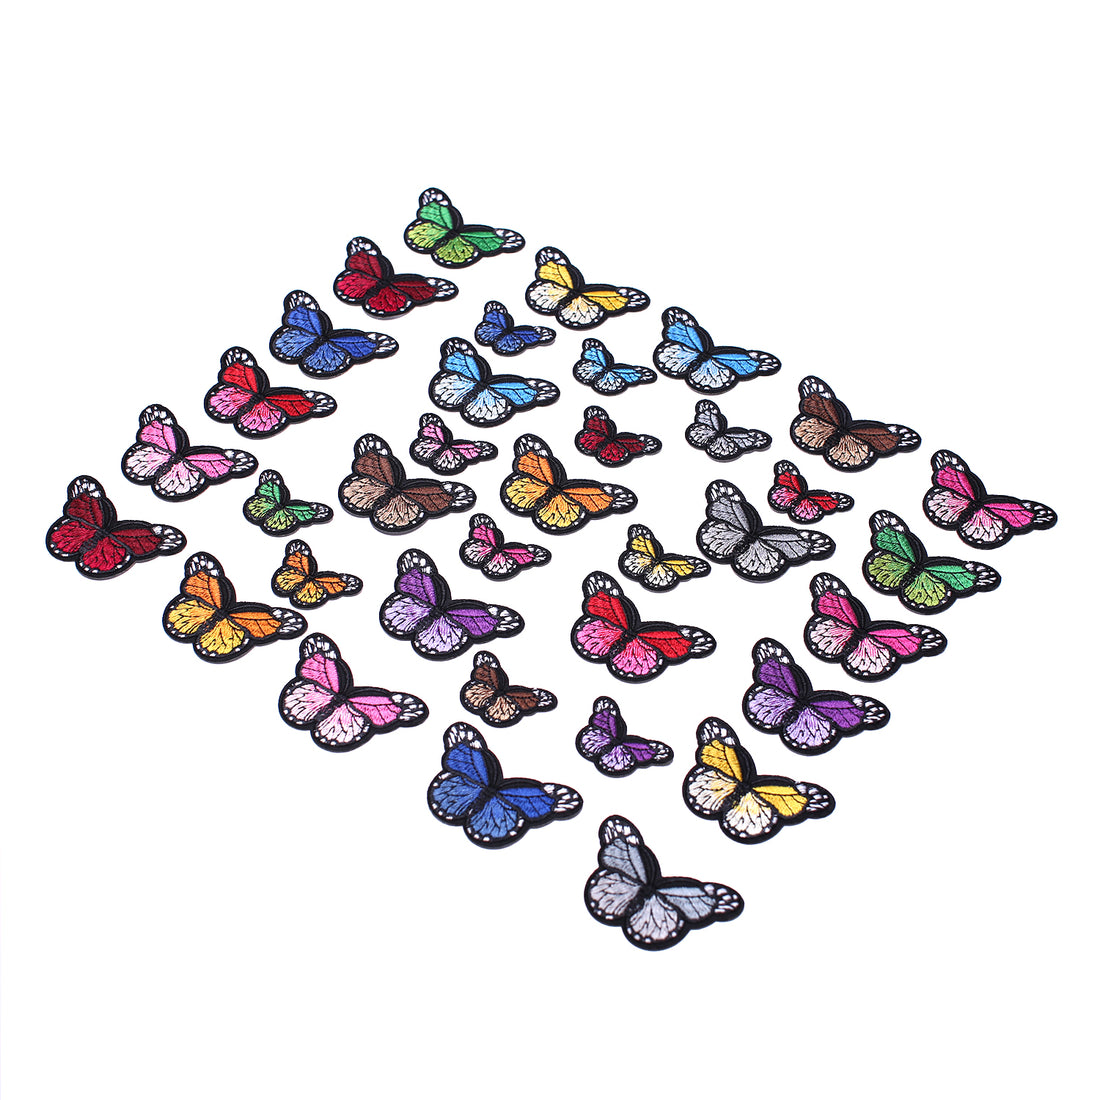 Butterfly Iron on Patches, Embroidered Sew Applique Repair Patch, 36PCS